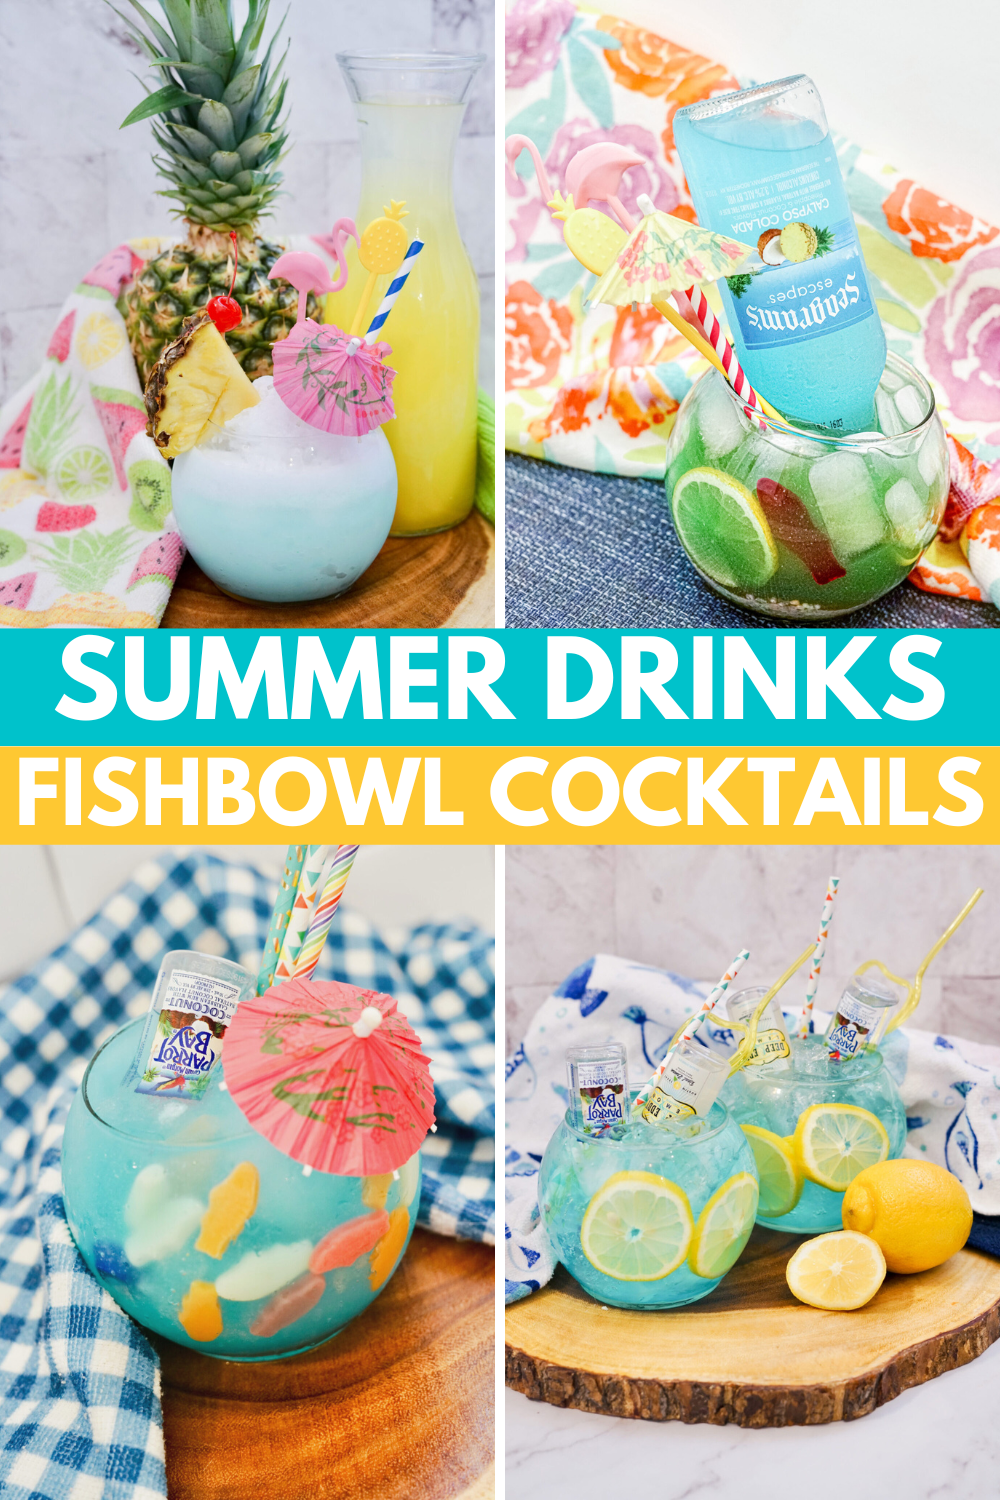 Summer Cocktail Party Menus | The BEST Fishbowl Cocktails